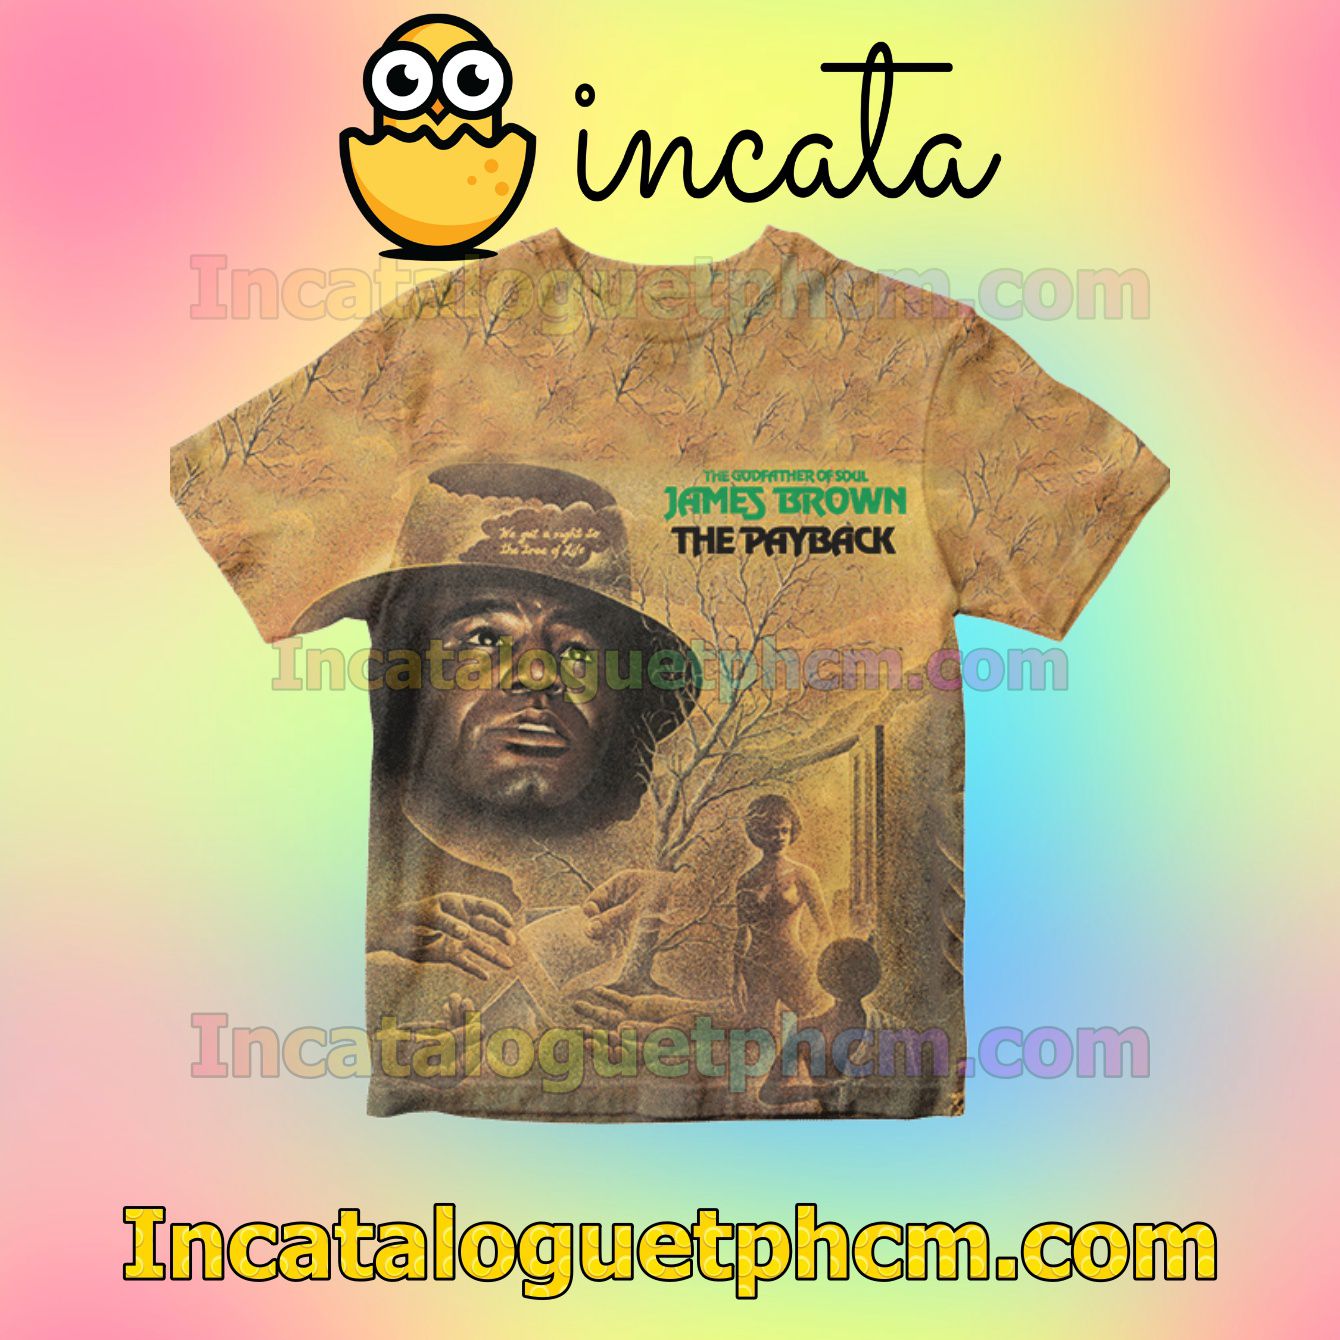 The Payback Album By James Brown Personalized Shirt